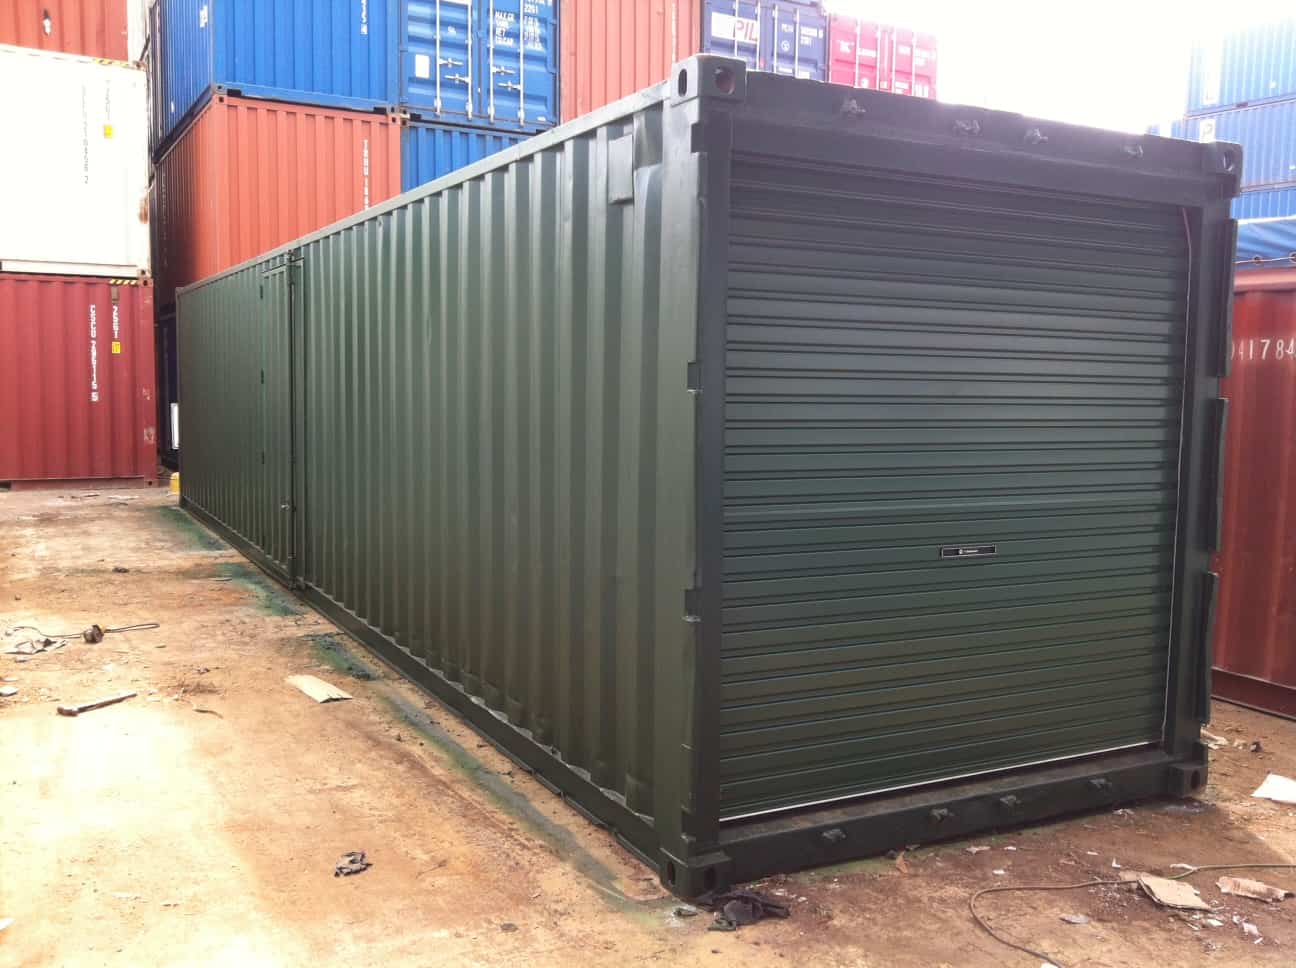 Shipping Containers In Australia